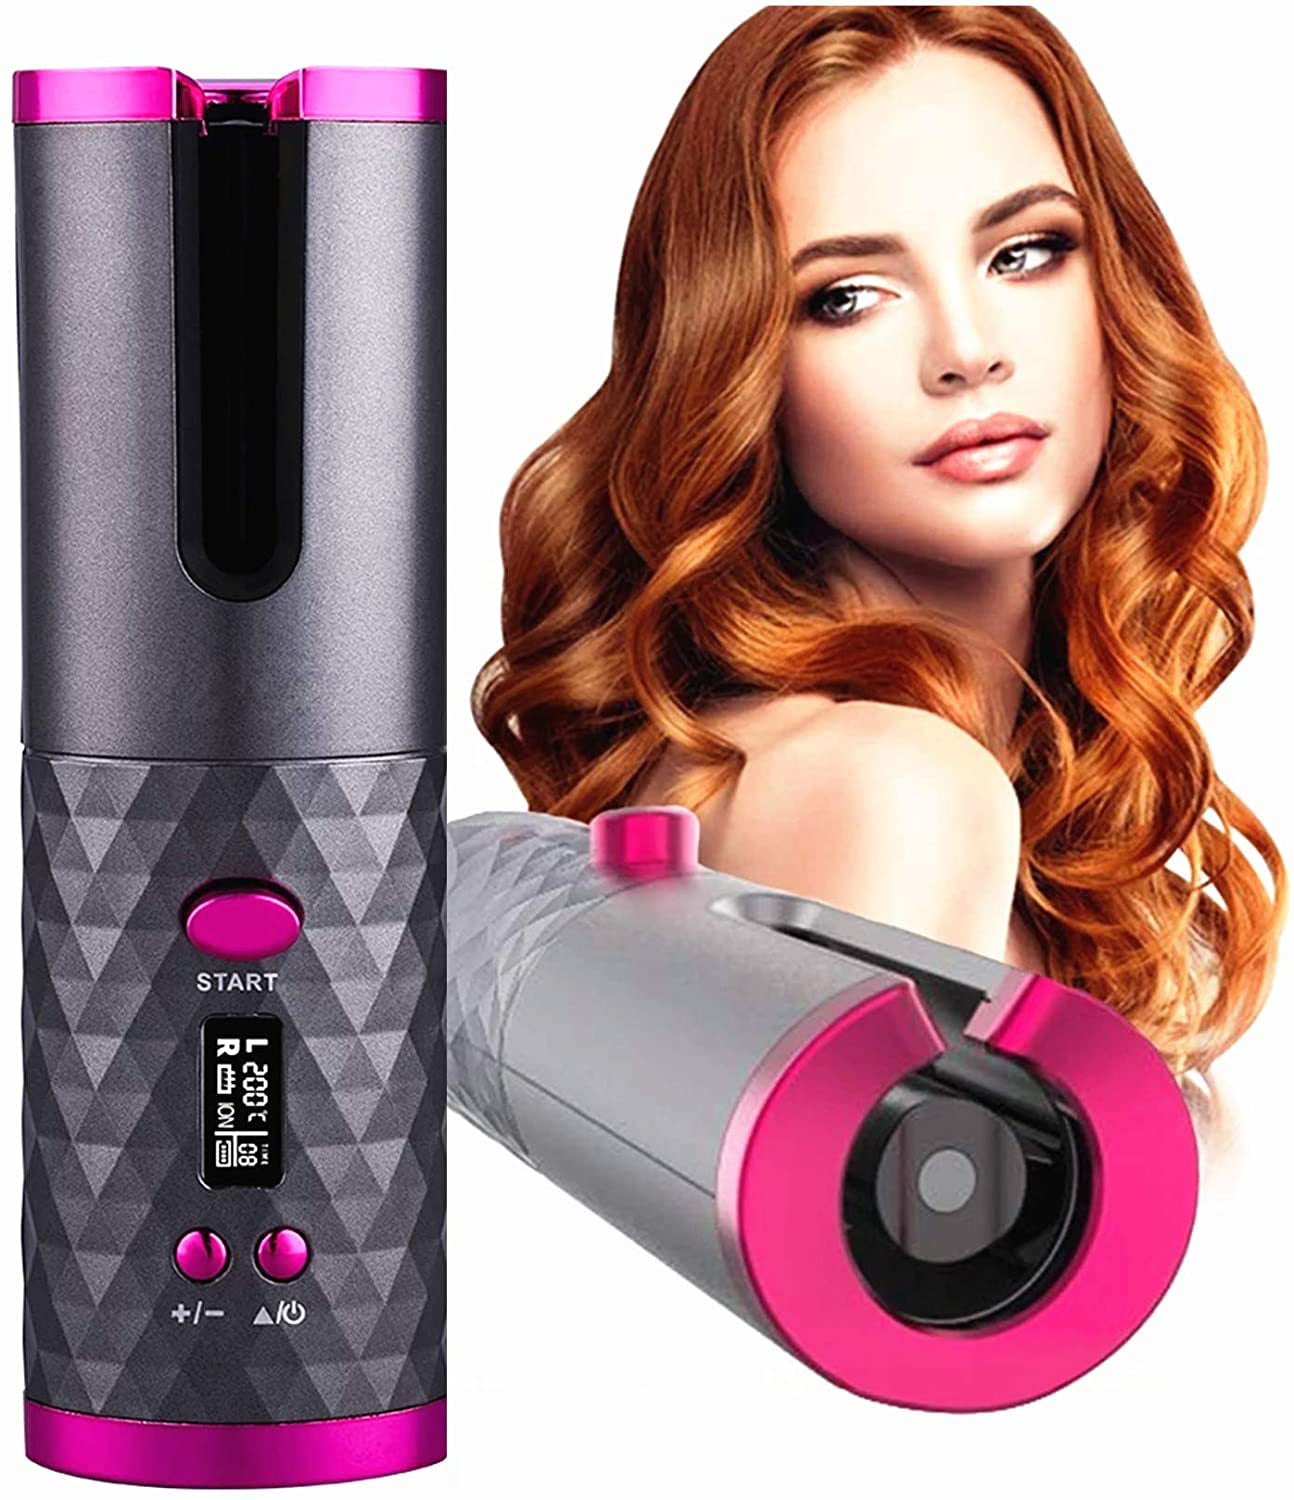 Buy Seenda Cordless Automatic Hair Curler, Portable Curling Wand for Hair  Styling Anytime, Anywhere, Rechargeable Auto Hair Curler with 6 Temperature  & Timer Settings Online at Lowest Price in Ubuy Nepal. 733807465